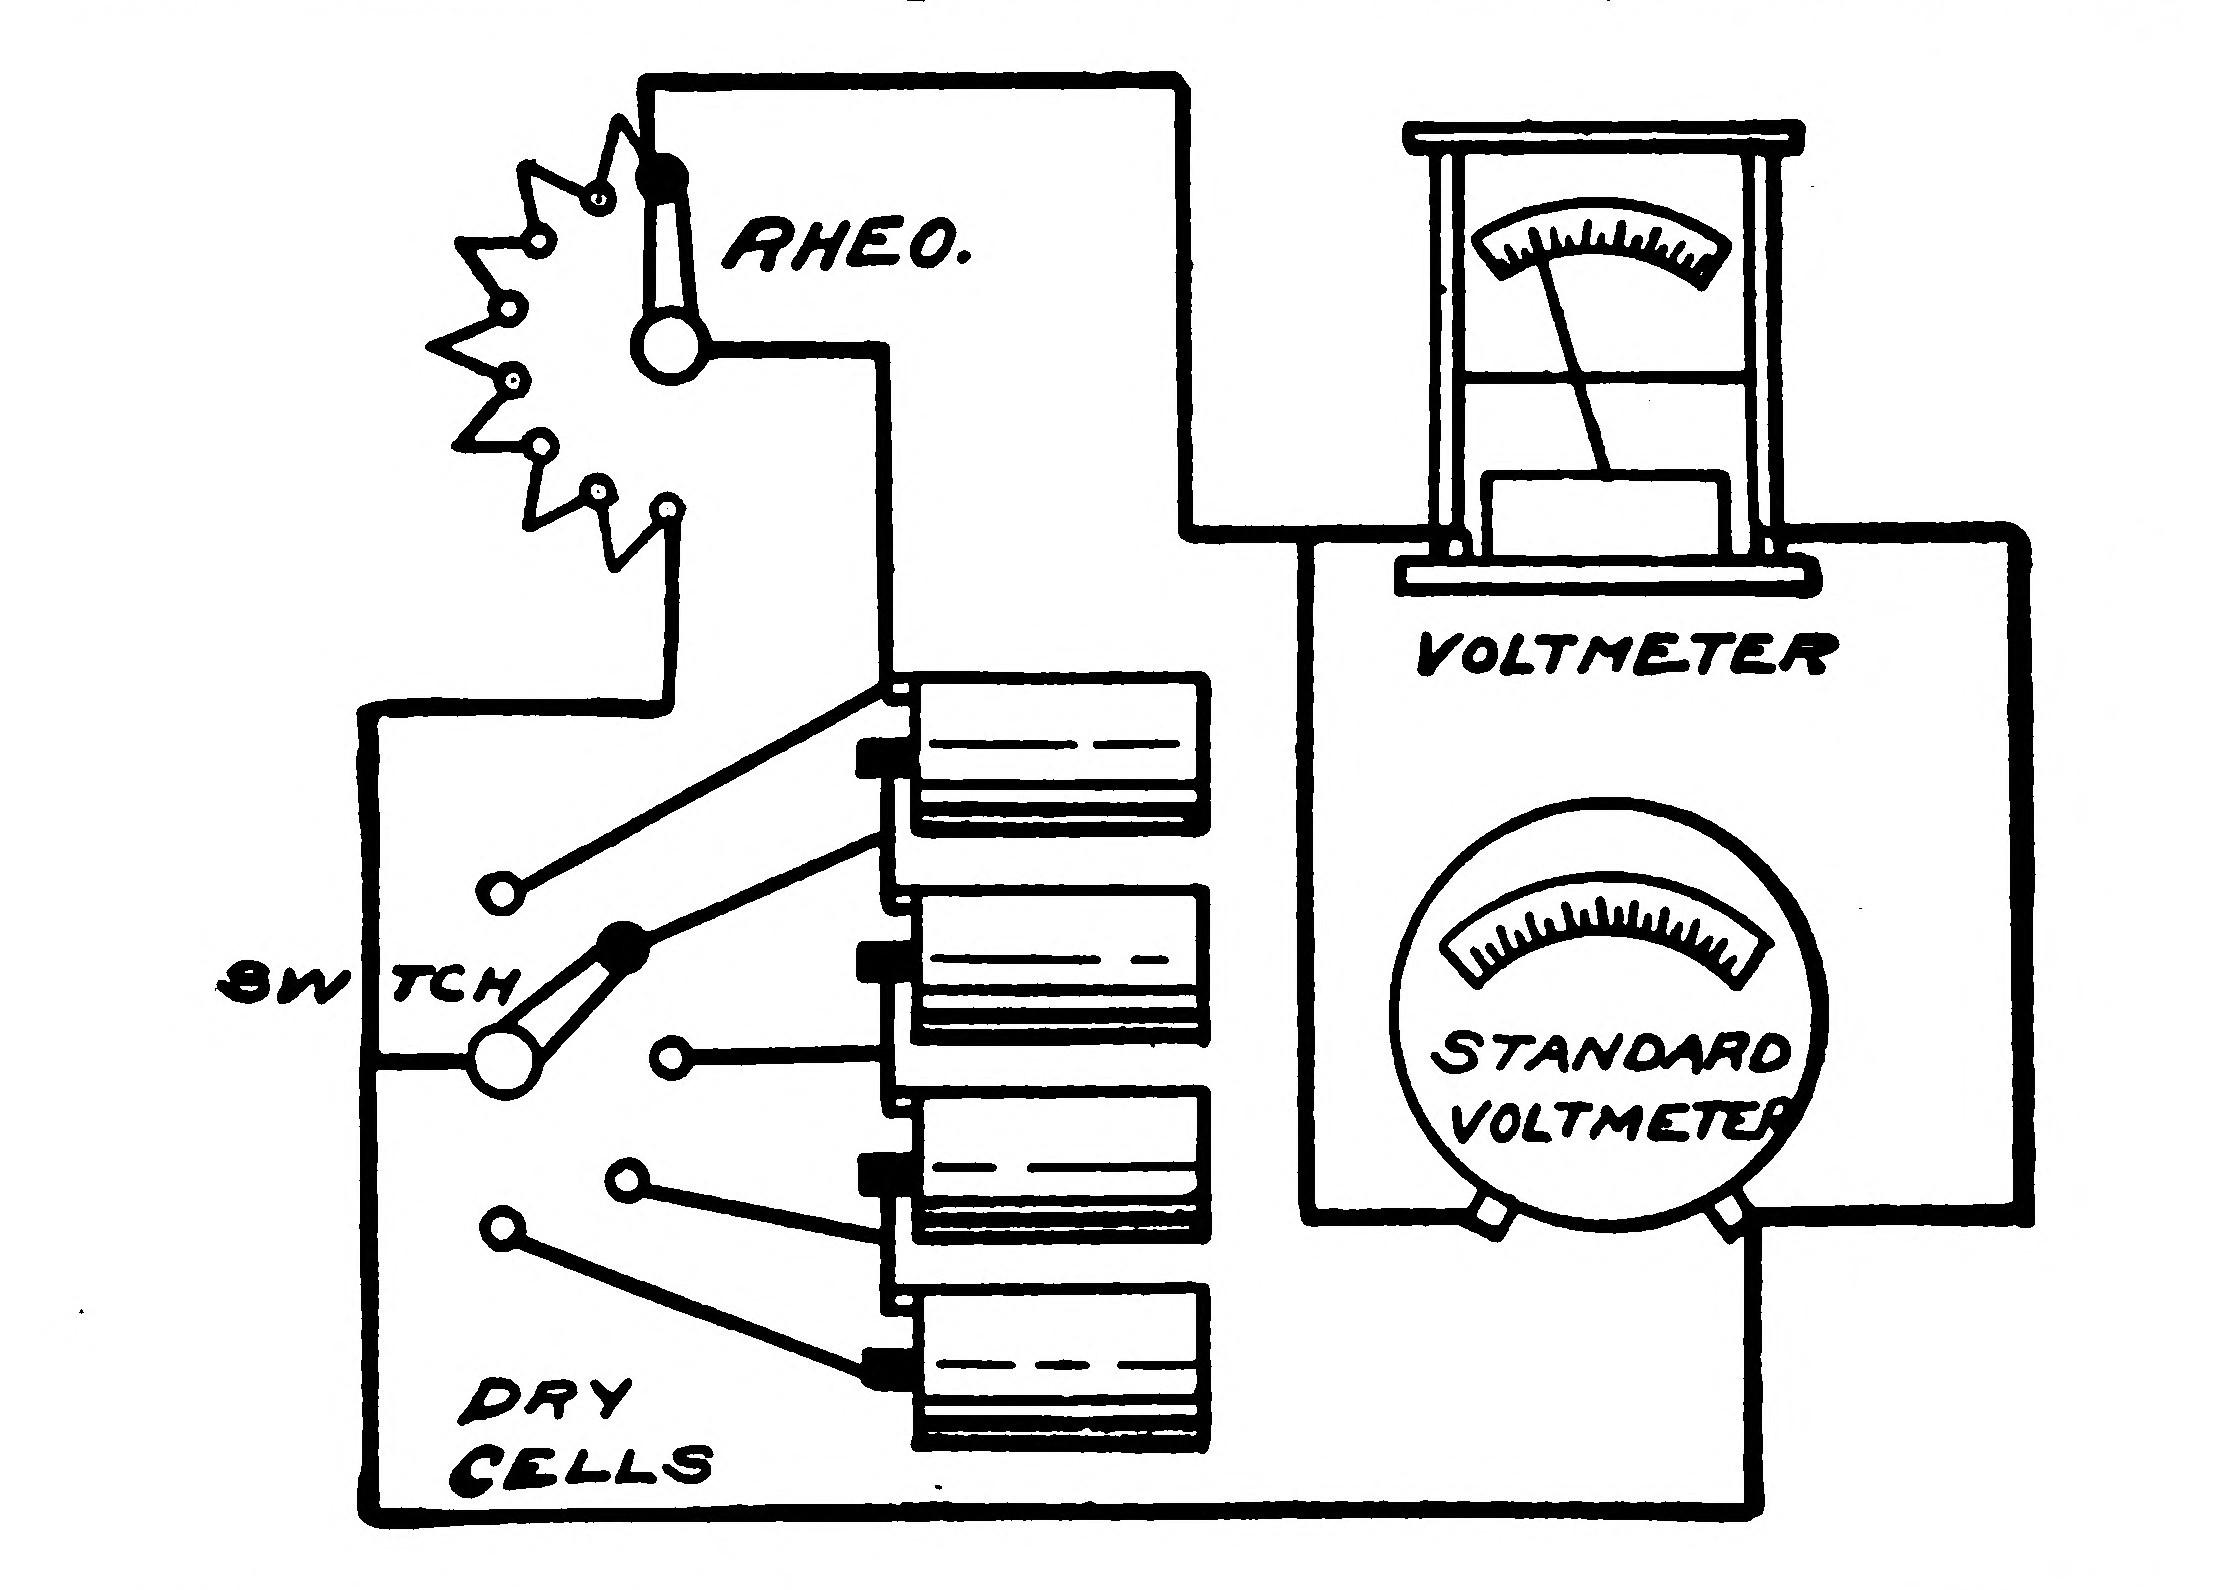 FIG. 75.—Showing how the Apparatus is arranged and connected for calibrating the Voltmeter.